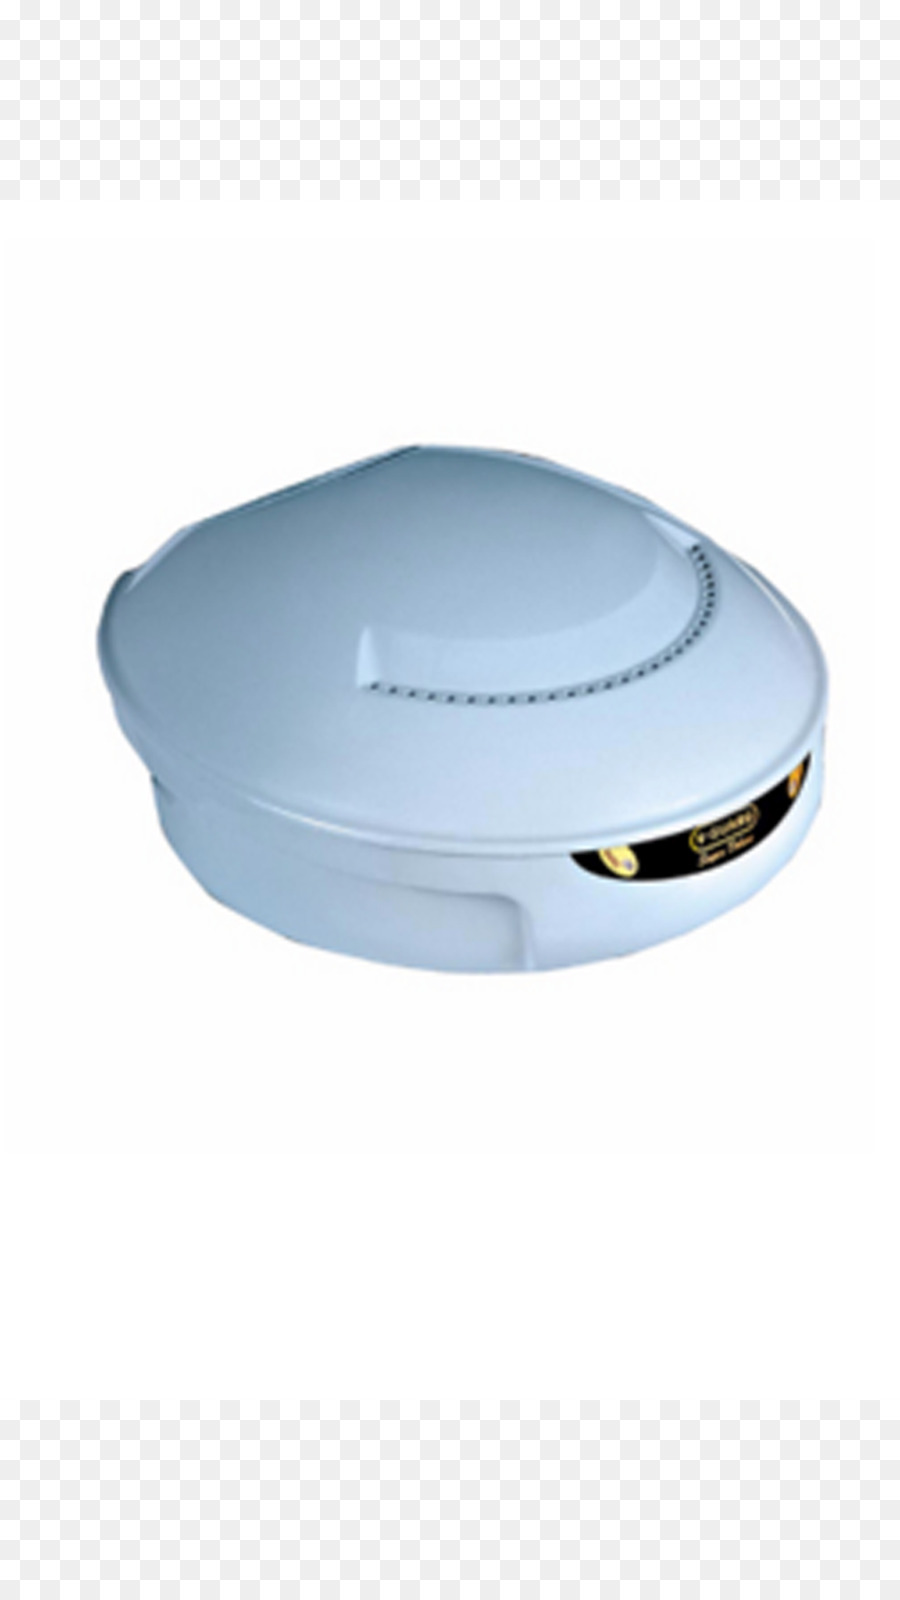 Vguard Industries Wireless Access Point